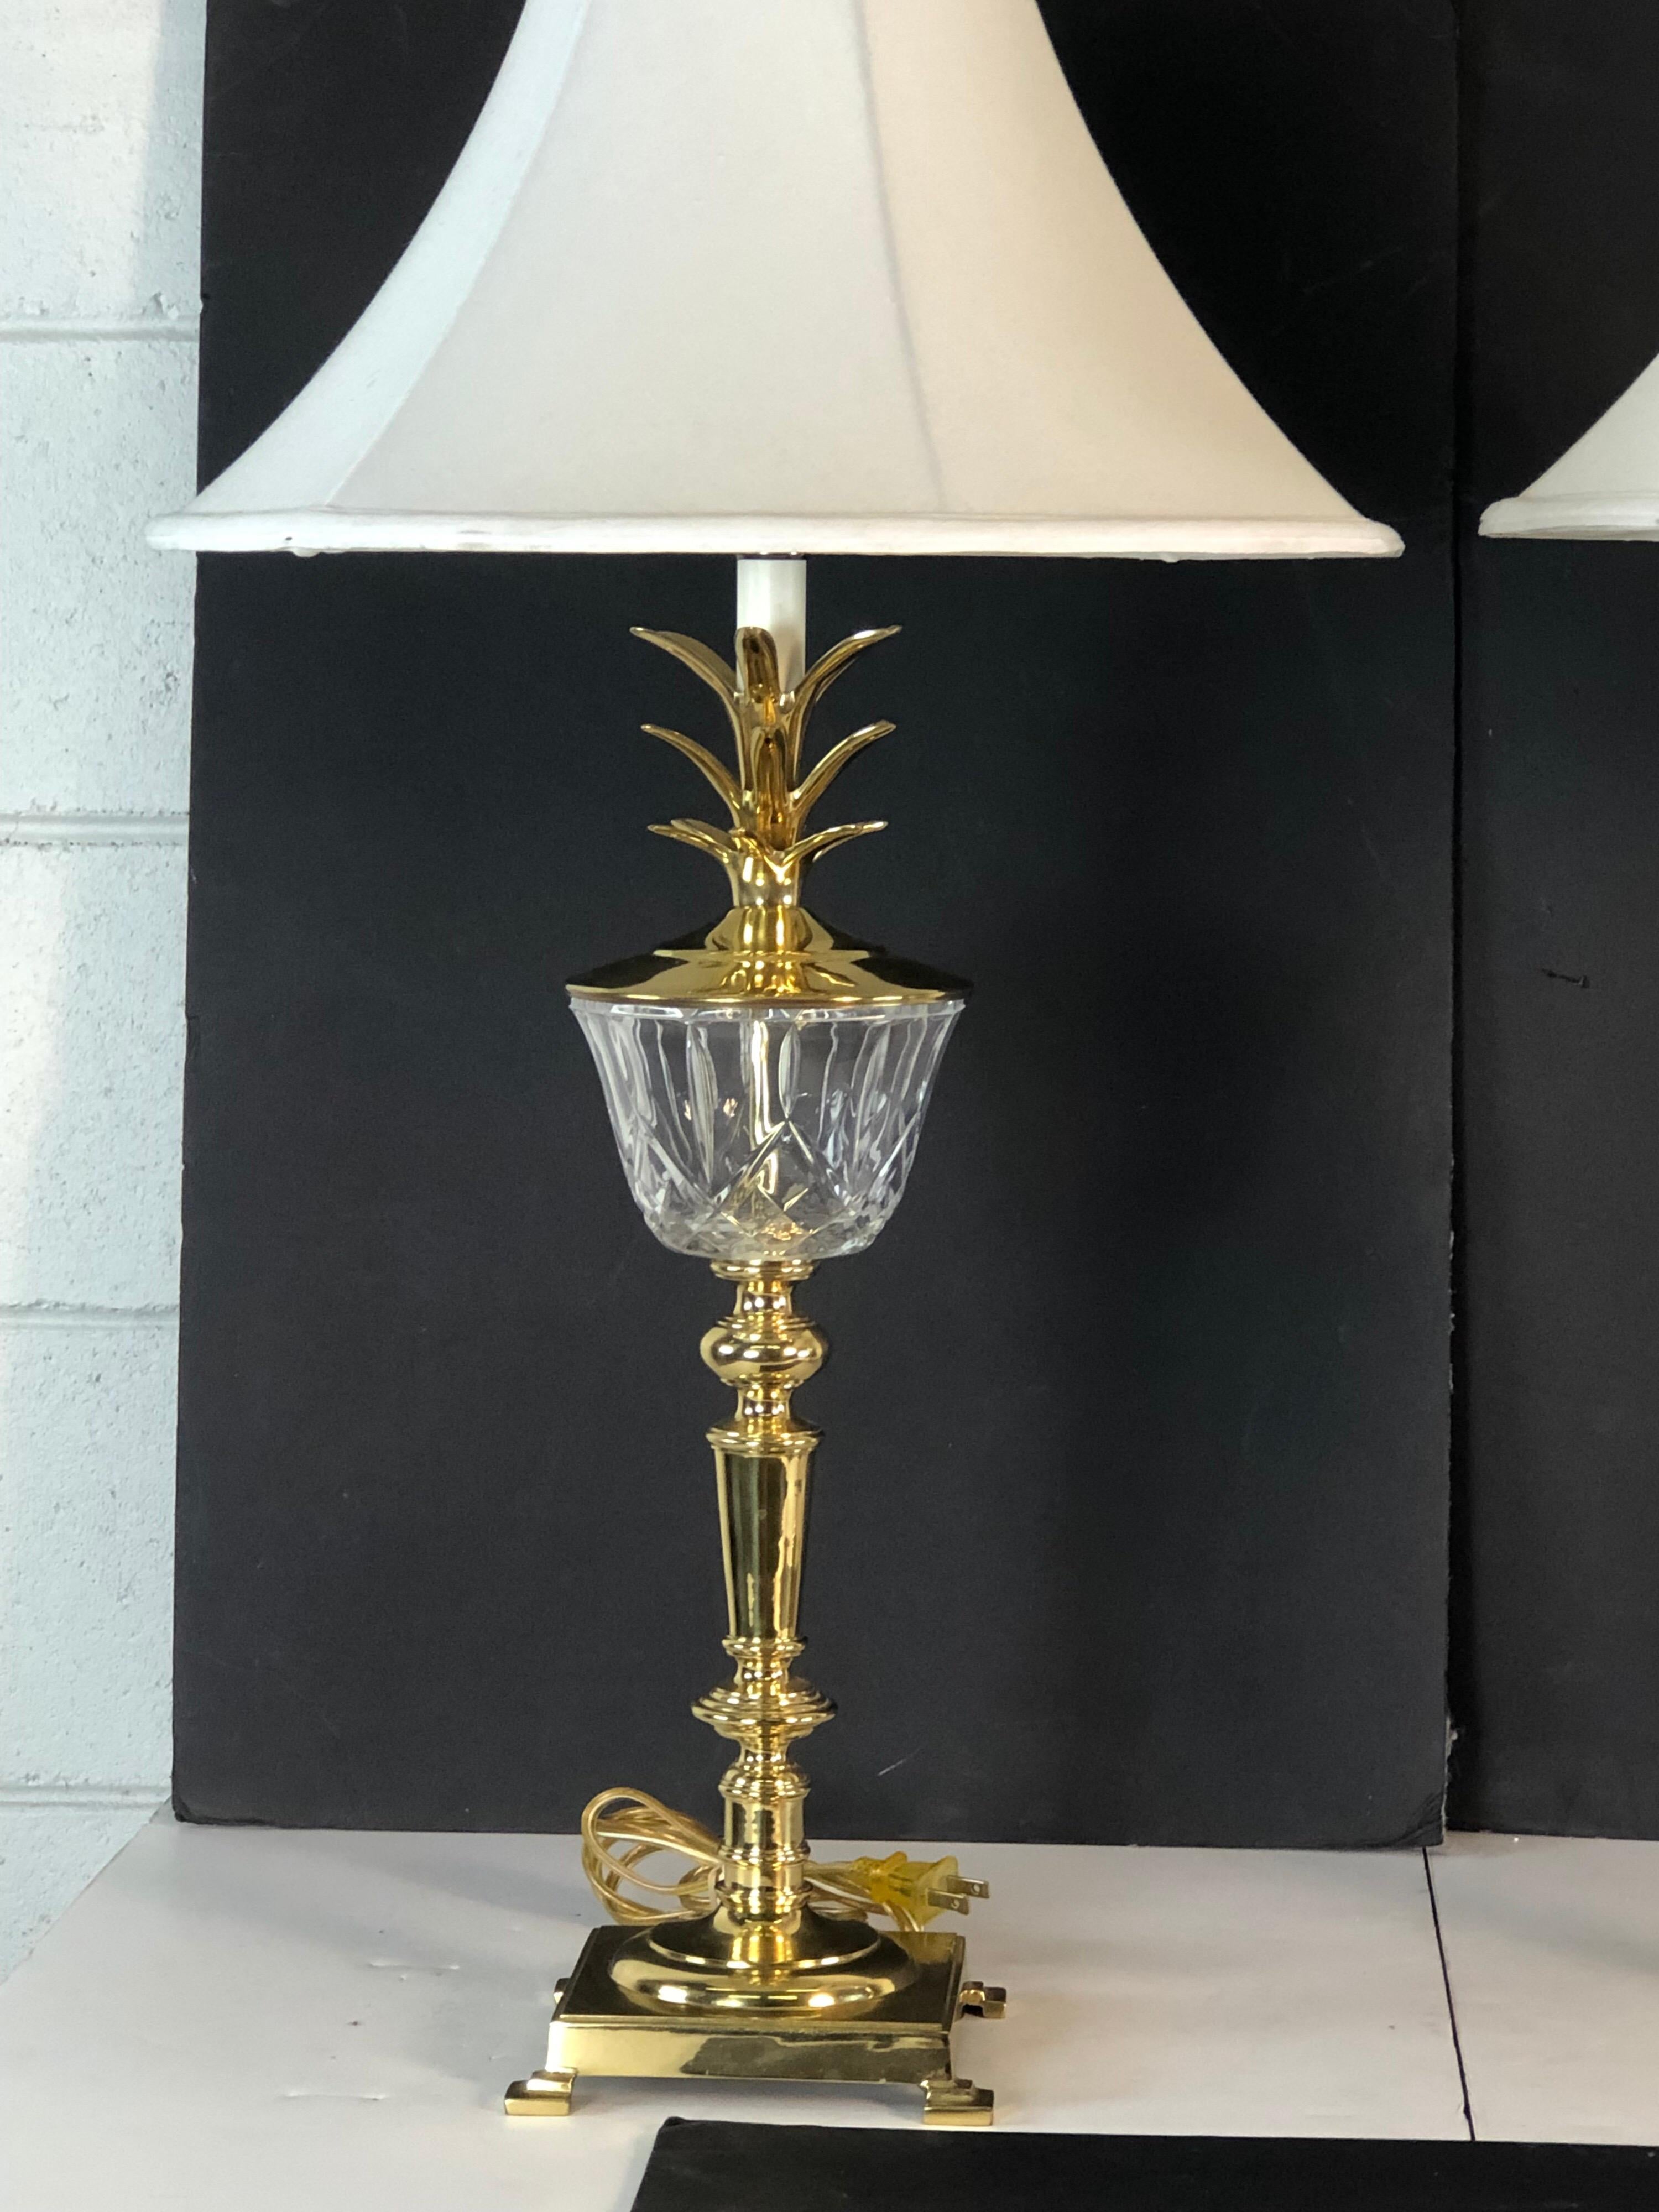 Hollywood Regency style pair of brass and glass pineapple table lamps. The lamps have the original brass finials. The lamps are wired for the US and in working condition. Socket, 23” height. Harp, 4”diameter x 9” height. The shades are not included.